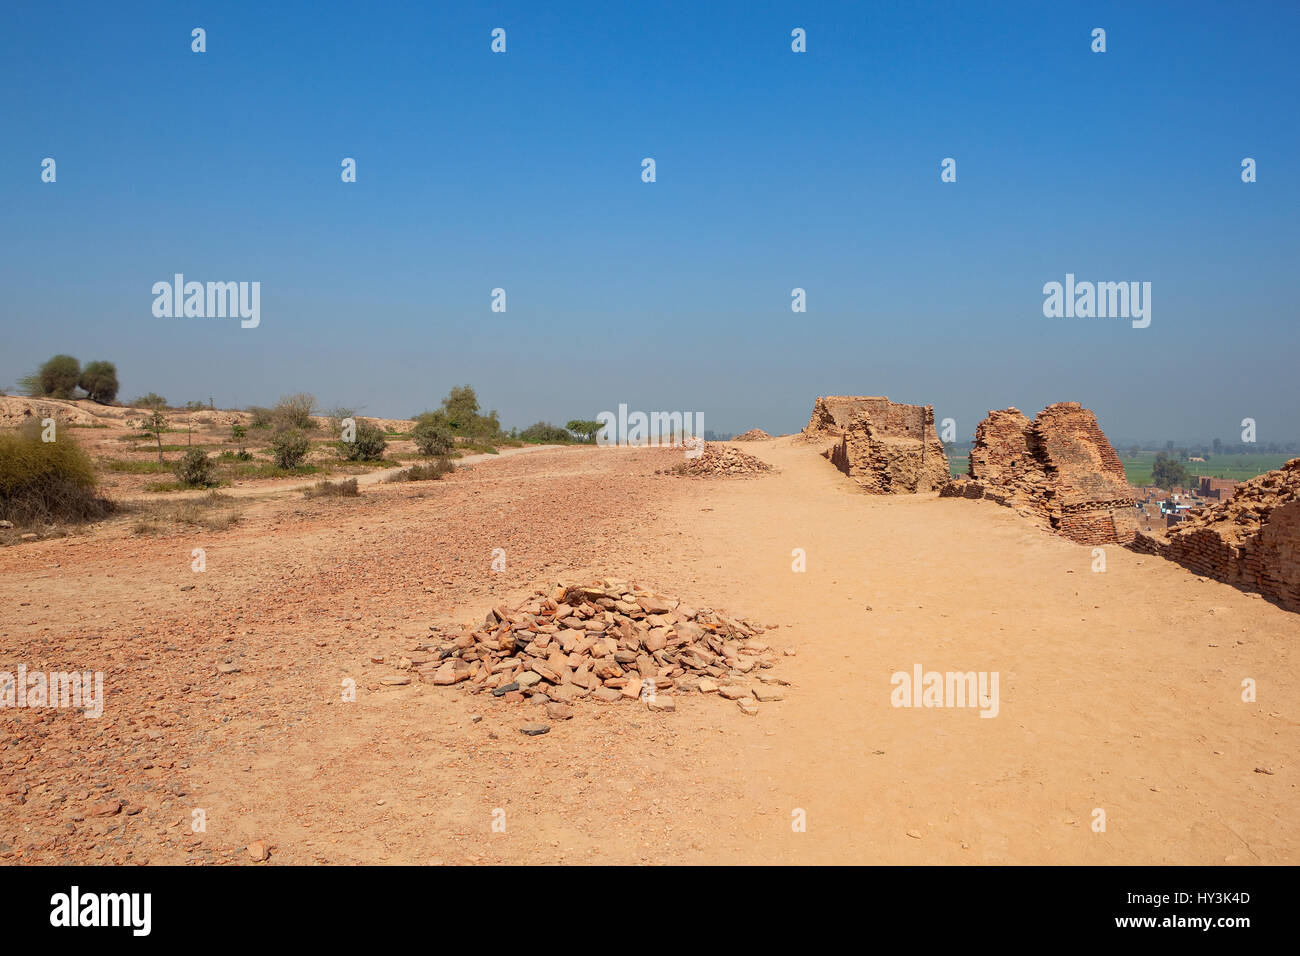 stone and brick surface on top of bhatner fort hanumangarh rajasthan india under a blue sky Stock Photo